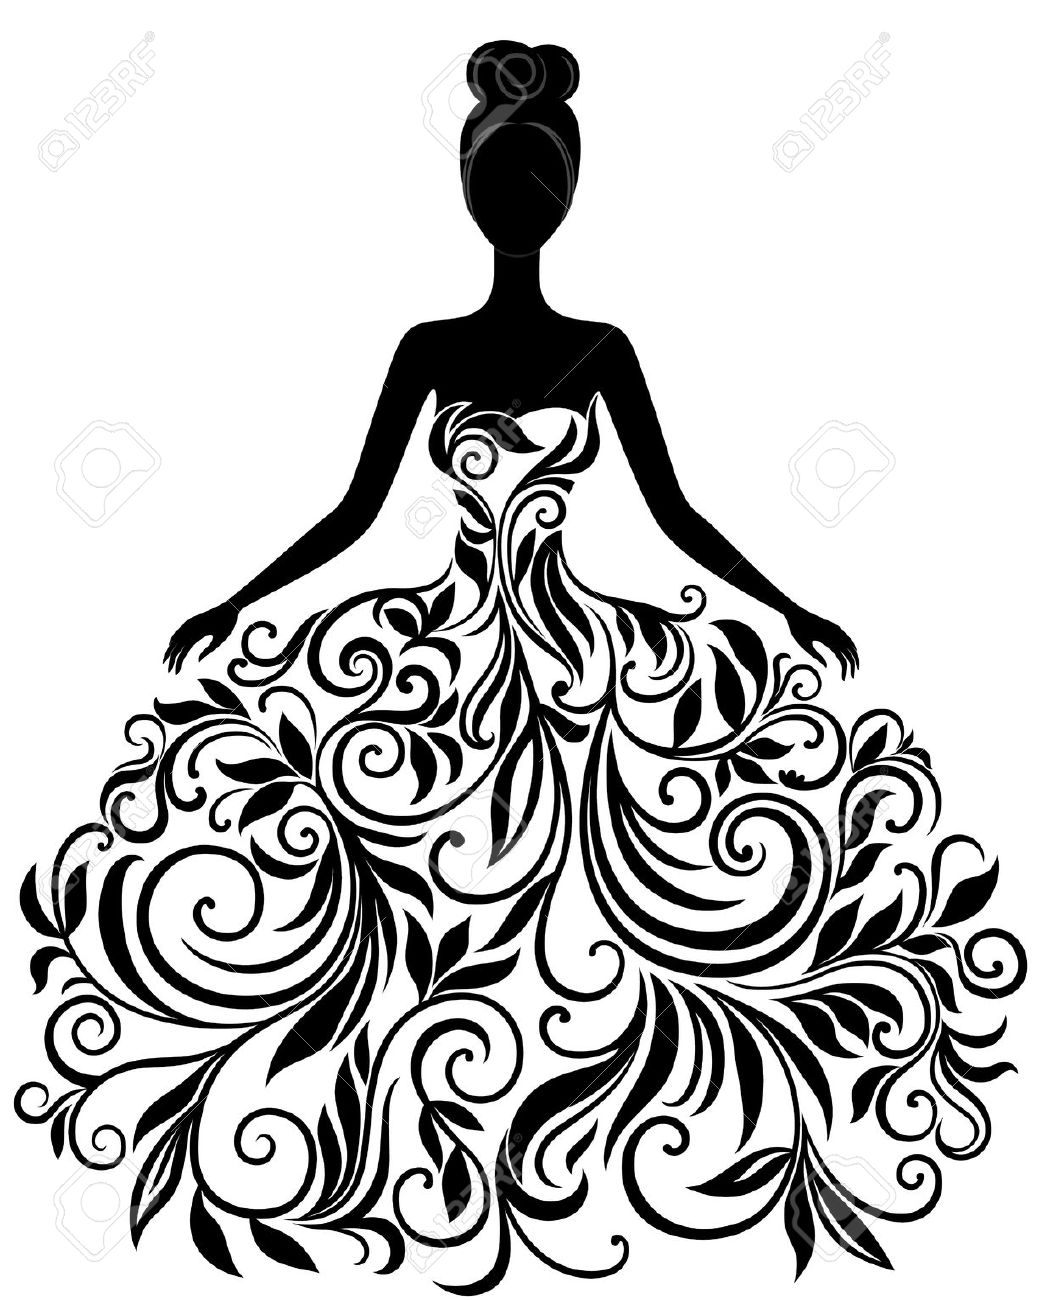 Wedding Dress Clipart Black And White.